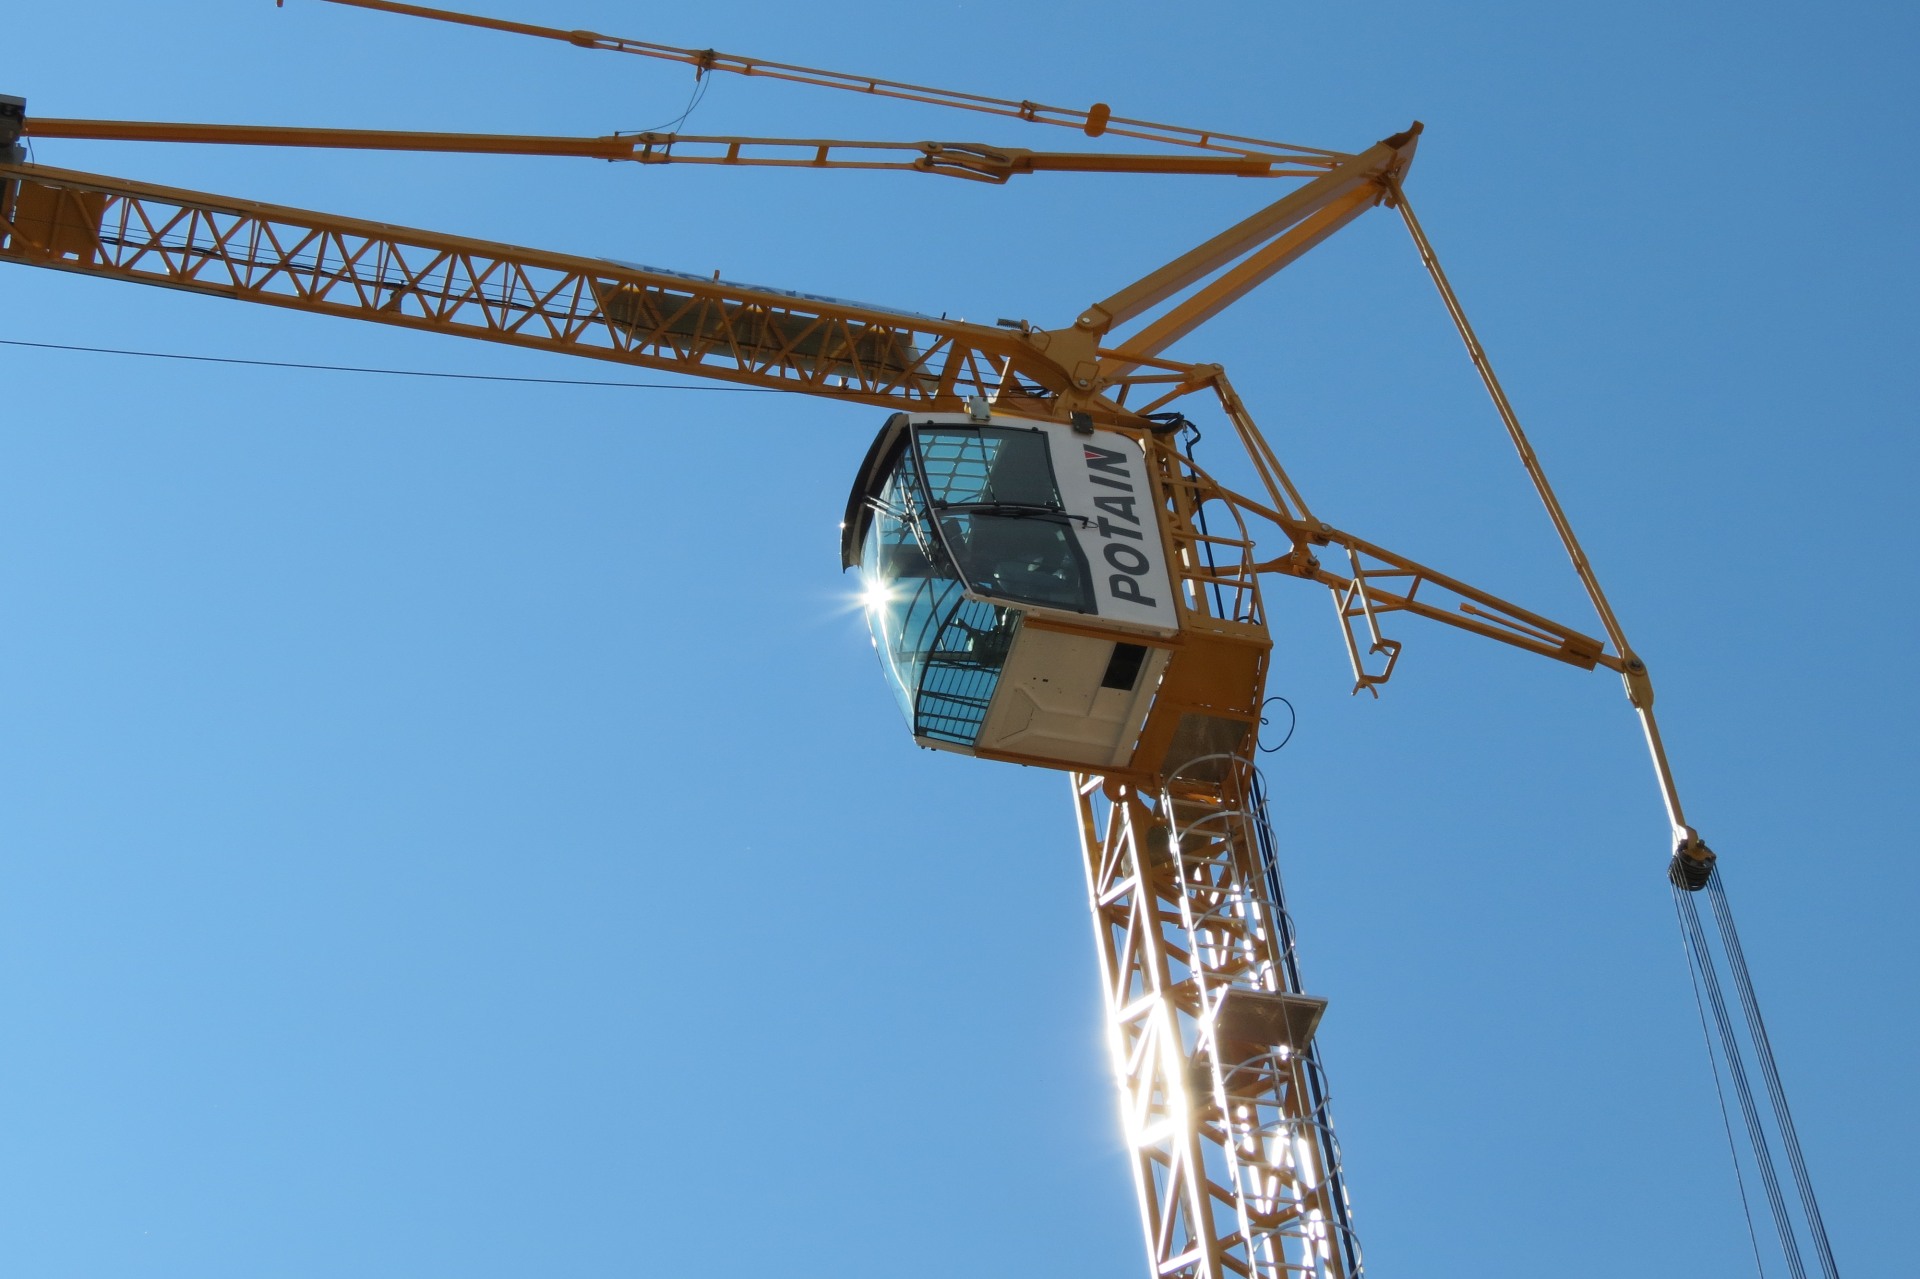 Potain-introduces-the-new-Igo-T-99-self-erecting-crane-with-improved-reach-and-capacity-from-a-compact-footprint-4